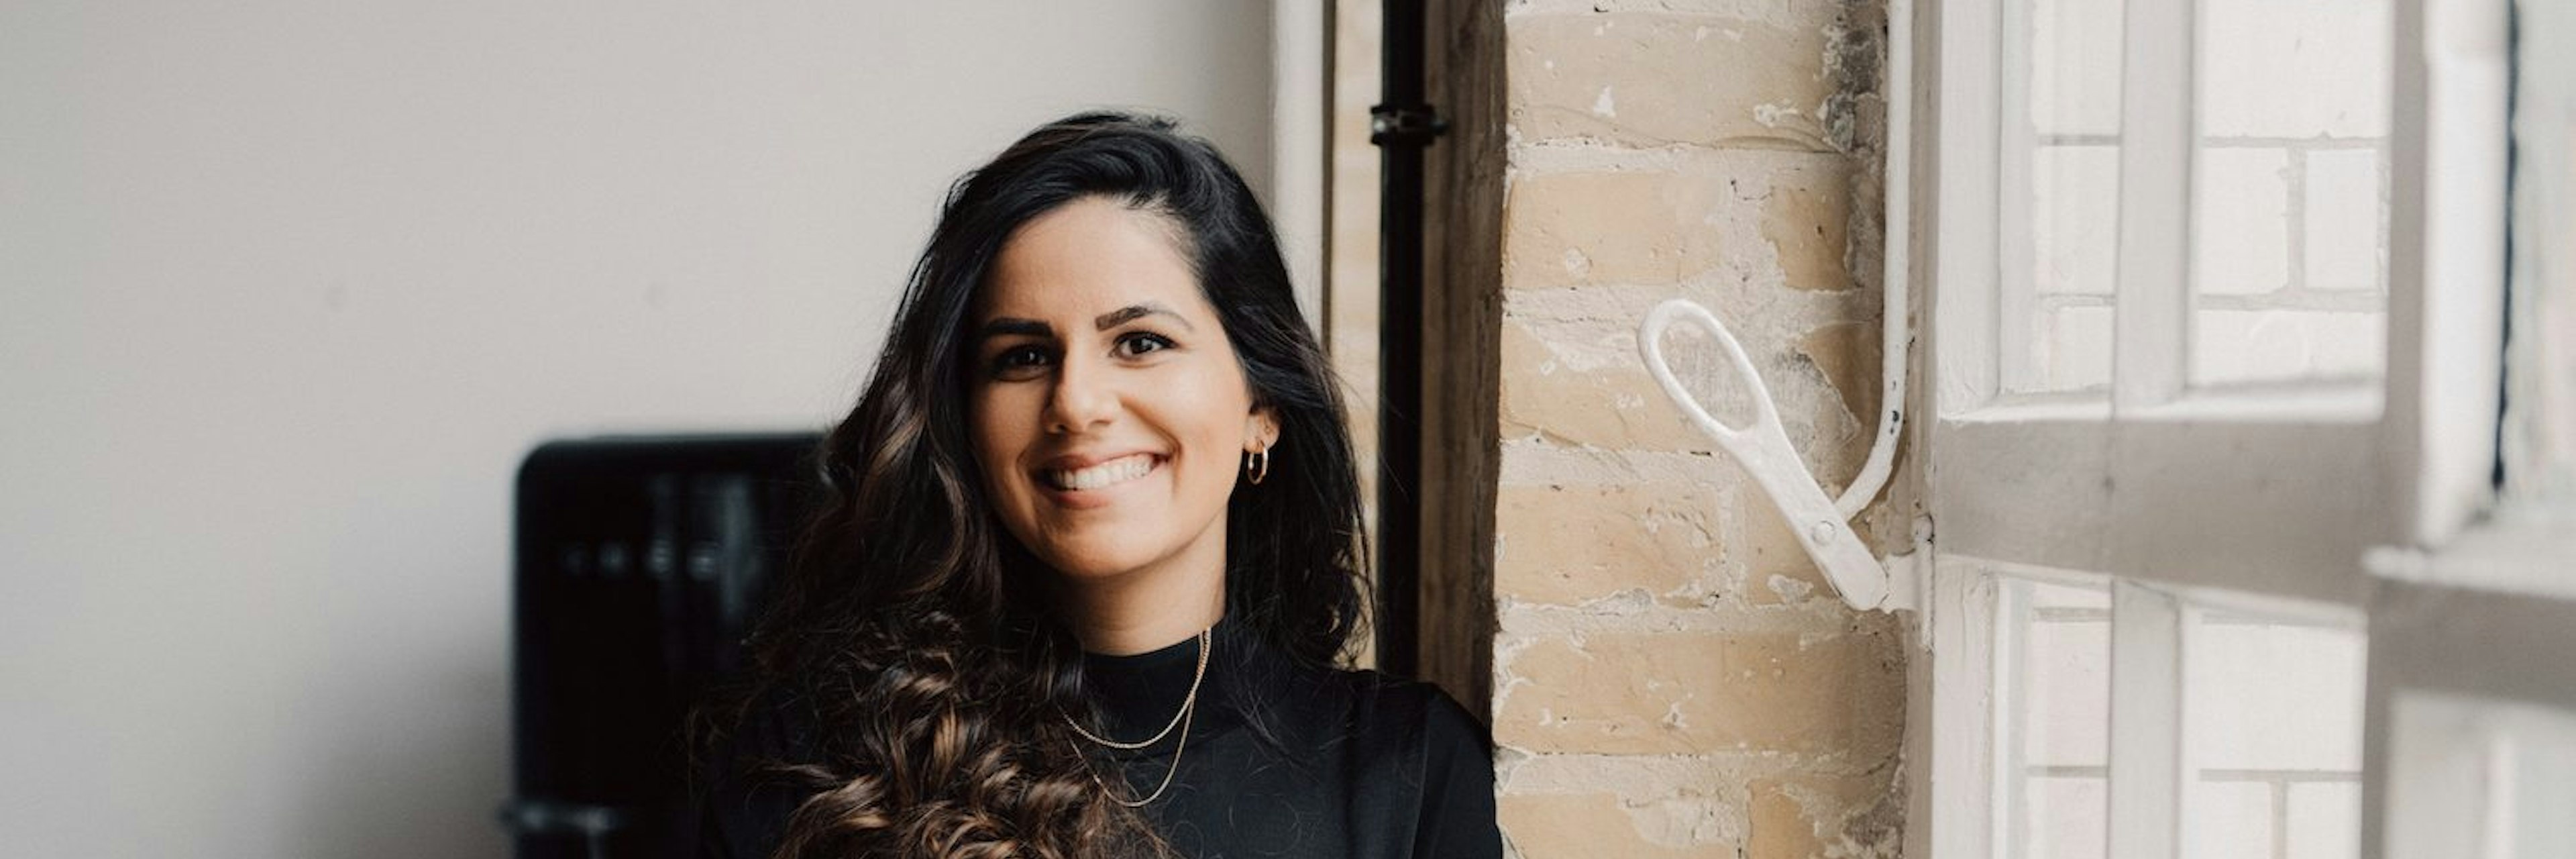 Alina Bassi, cofounder and CEO of Kleiderly, explains the challenges for ethnic minority founders startup fundraising